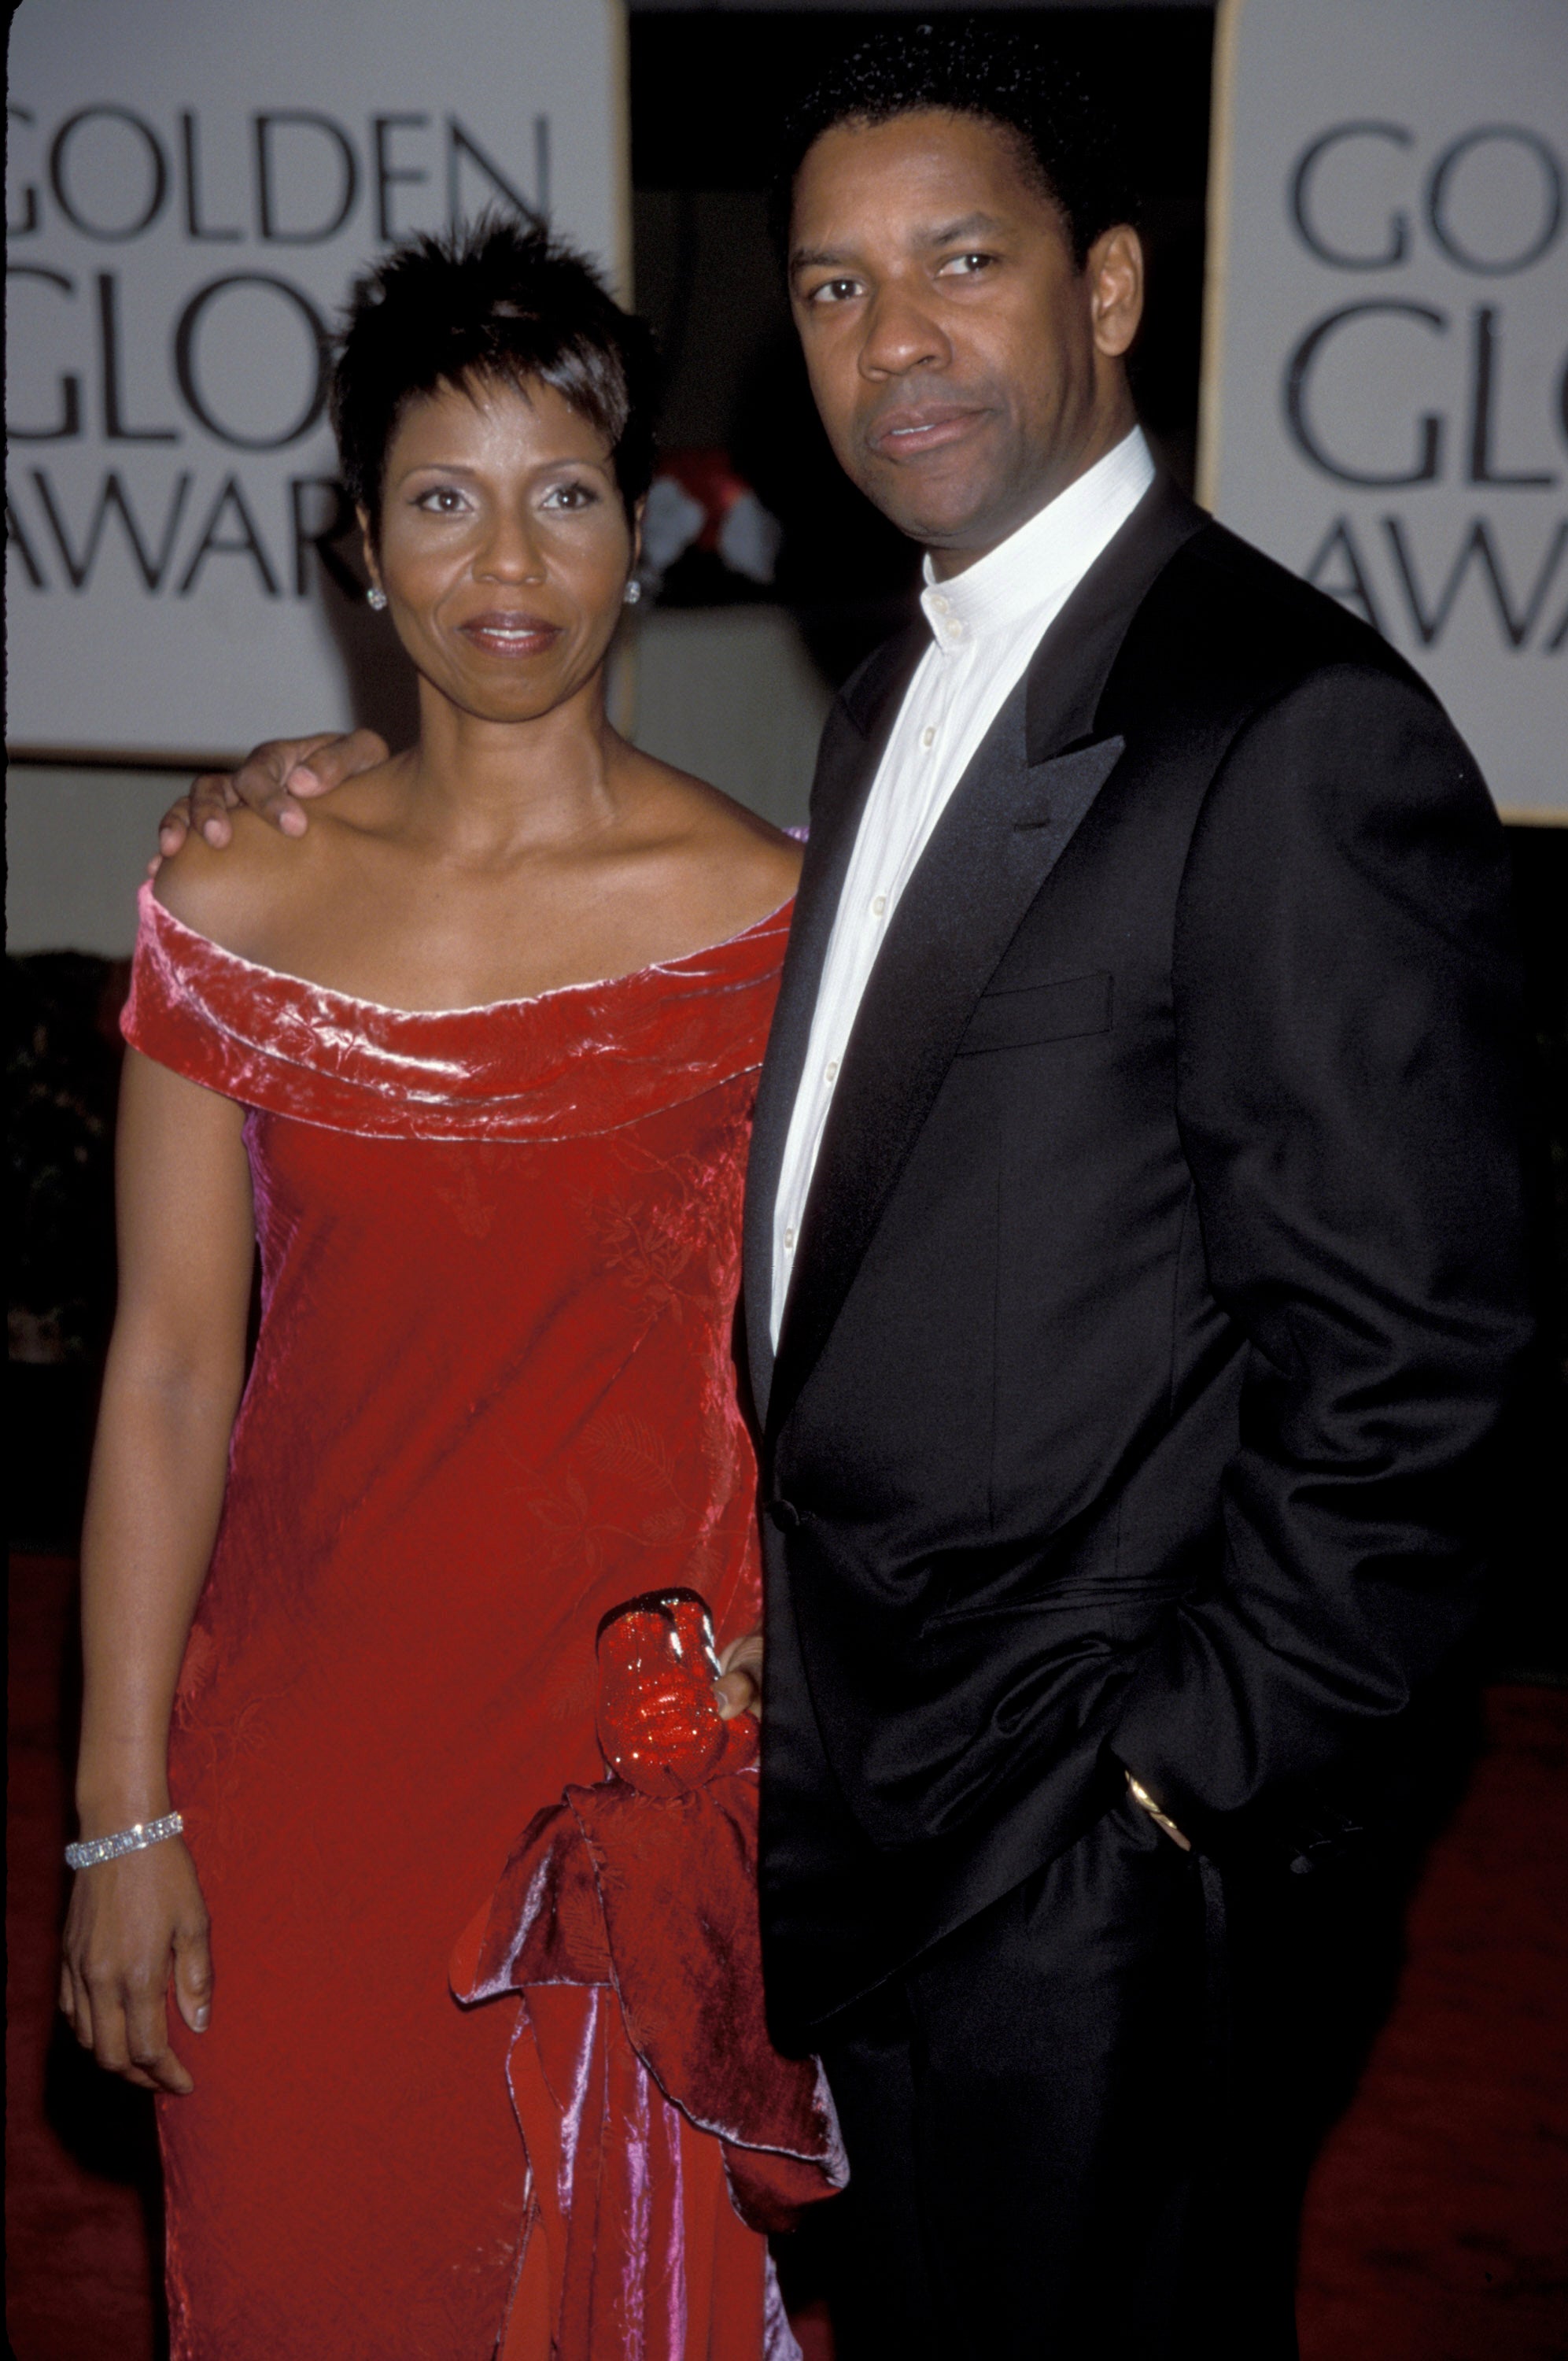 Here’s What The Golden Globes Red Carpet Looked Like 20 Years Ago